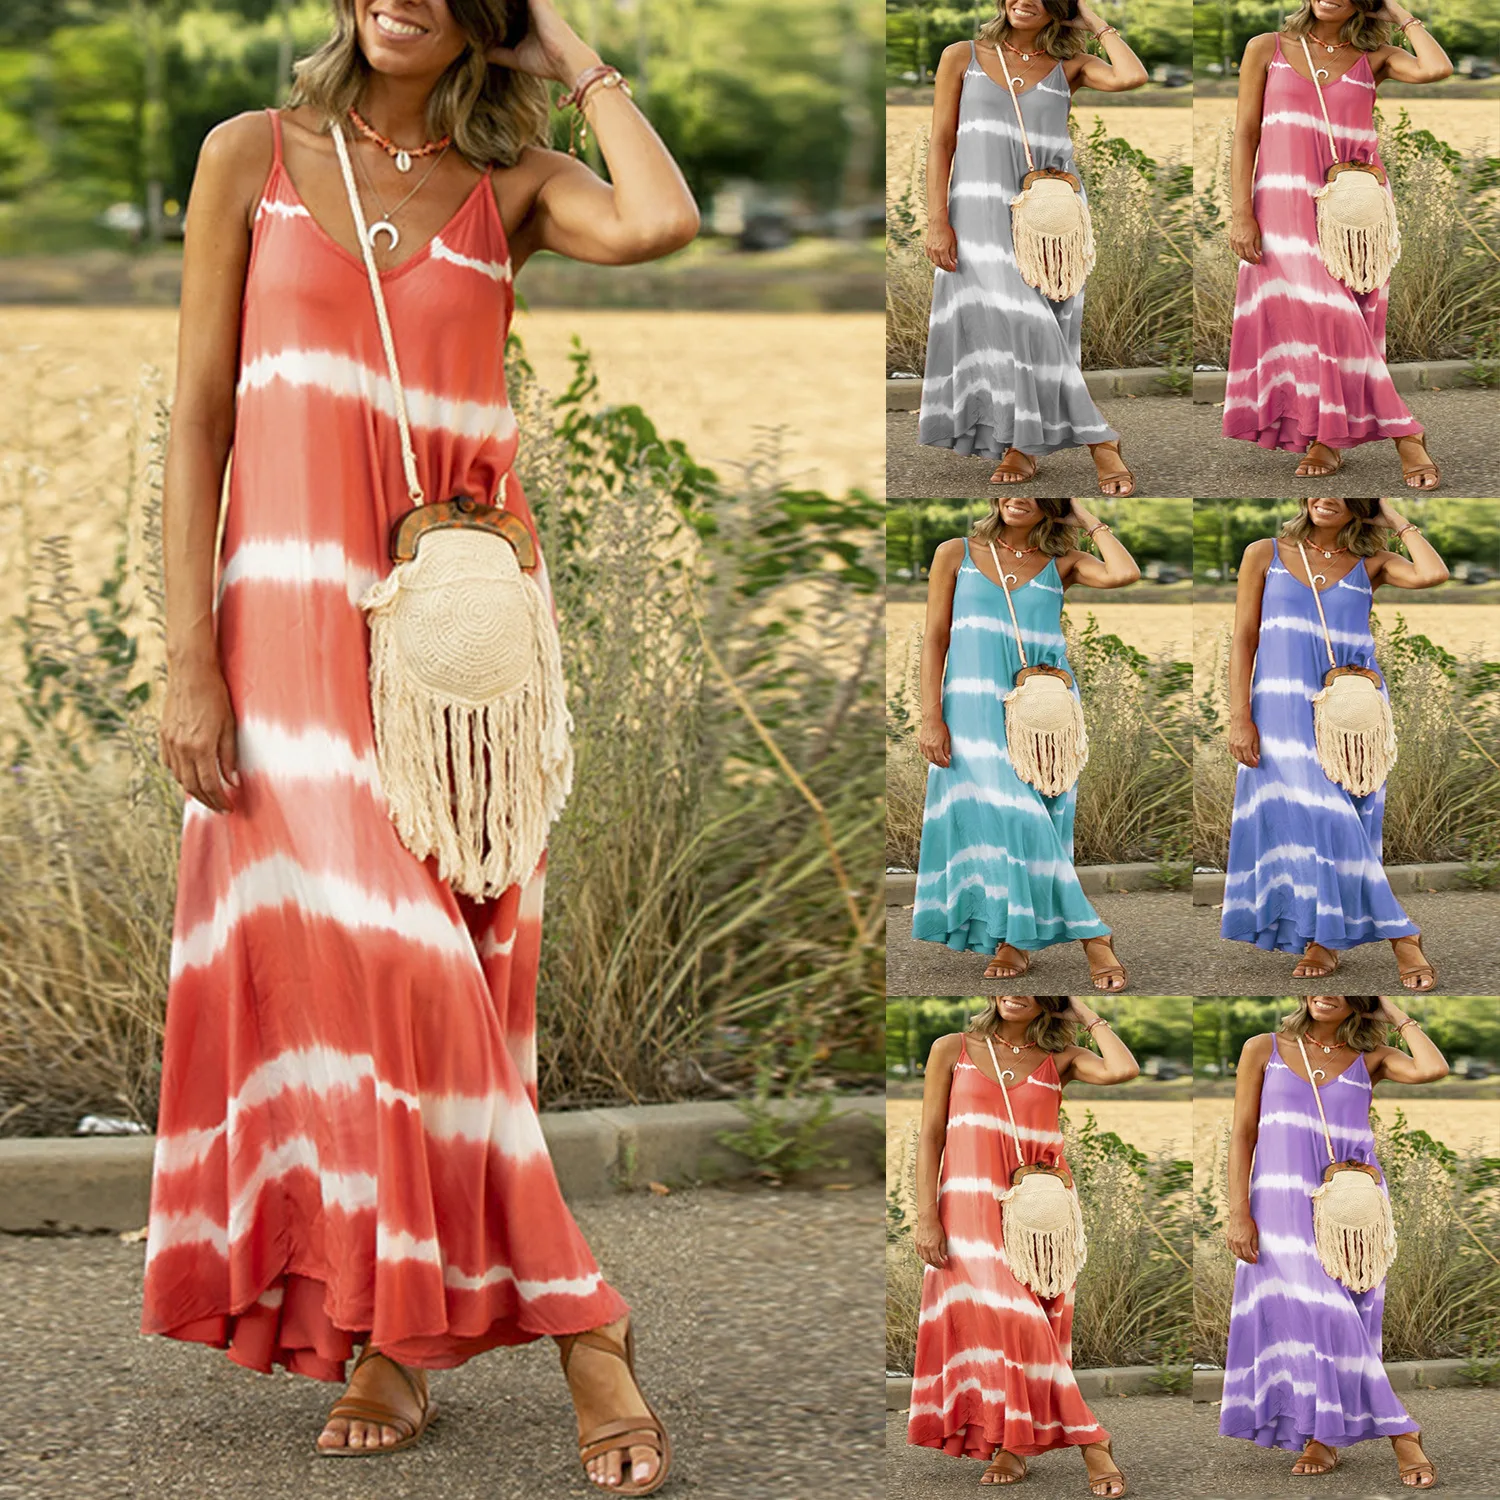 

Cross-border women's dress hot hot style sexy American and American condole belt Mosaic stripe big dress women, As picture shows